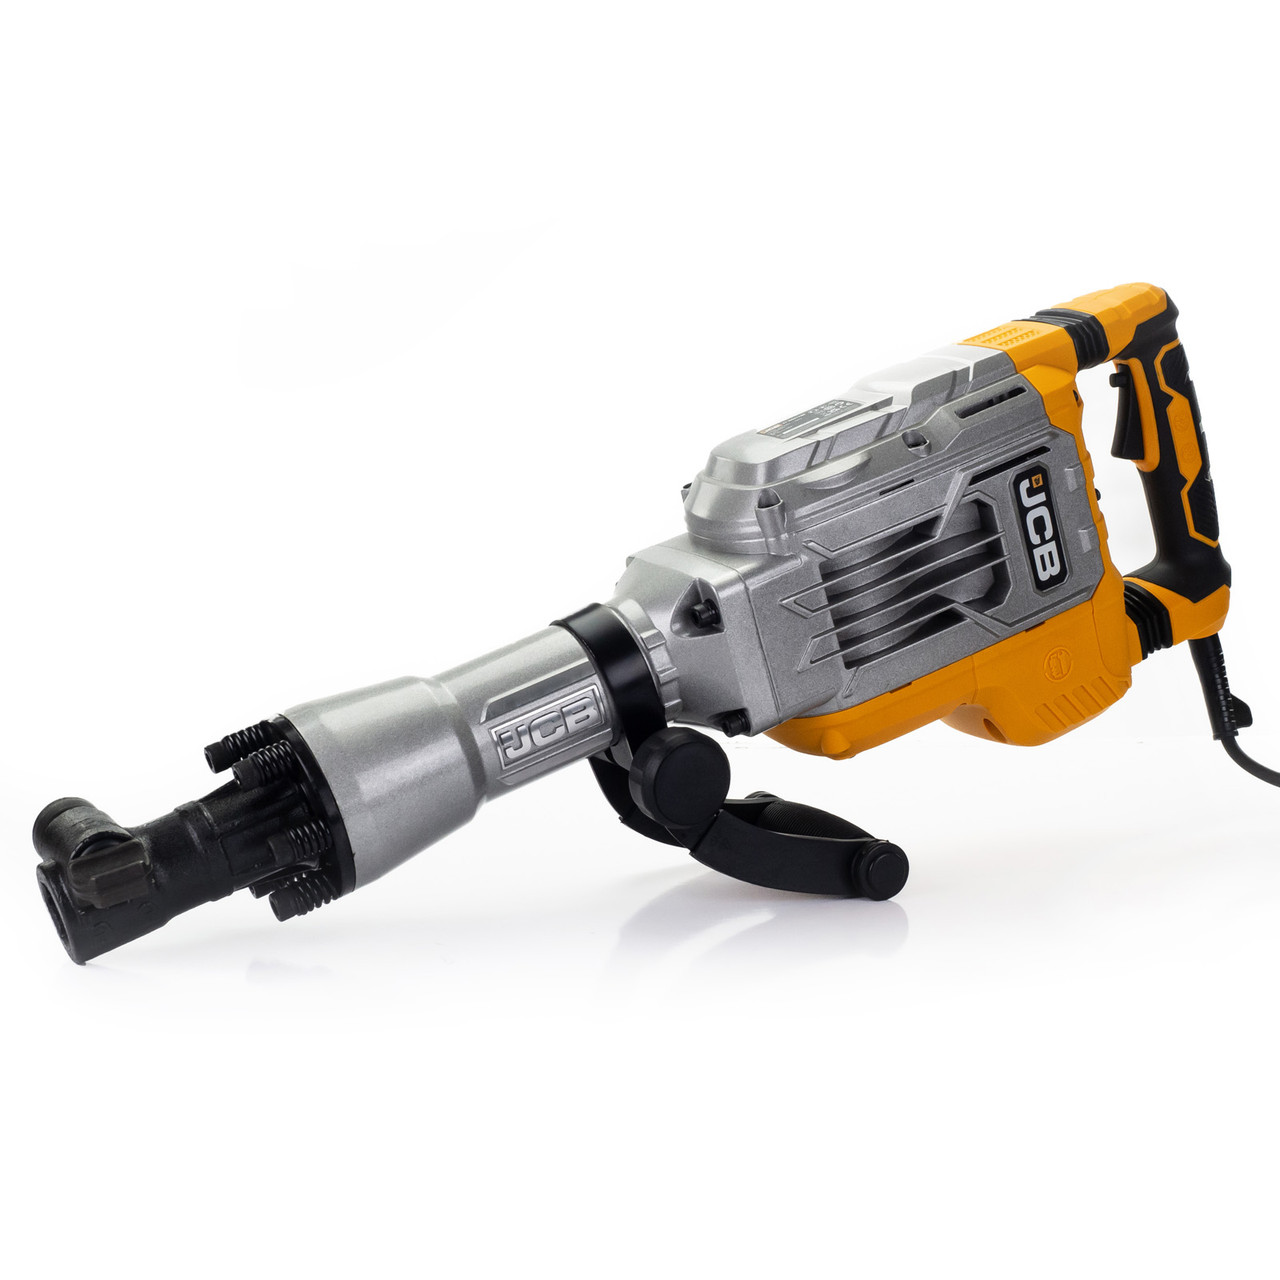 Demolition Hammer Gas Powerd Rock Drill Rock Breaker Hammer 1700w with  Point and Flat Chisel Multi-function Crusher Demolition Drilling Hammer  Jack